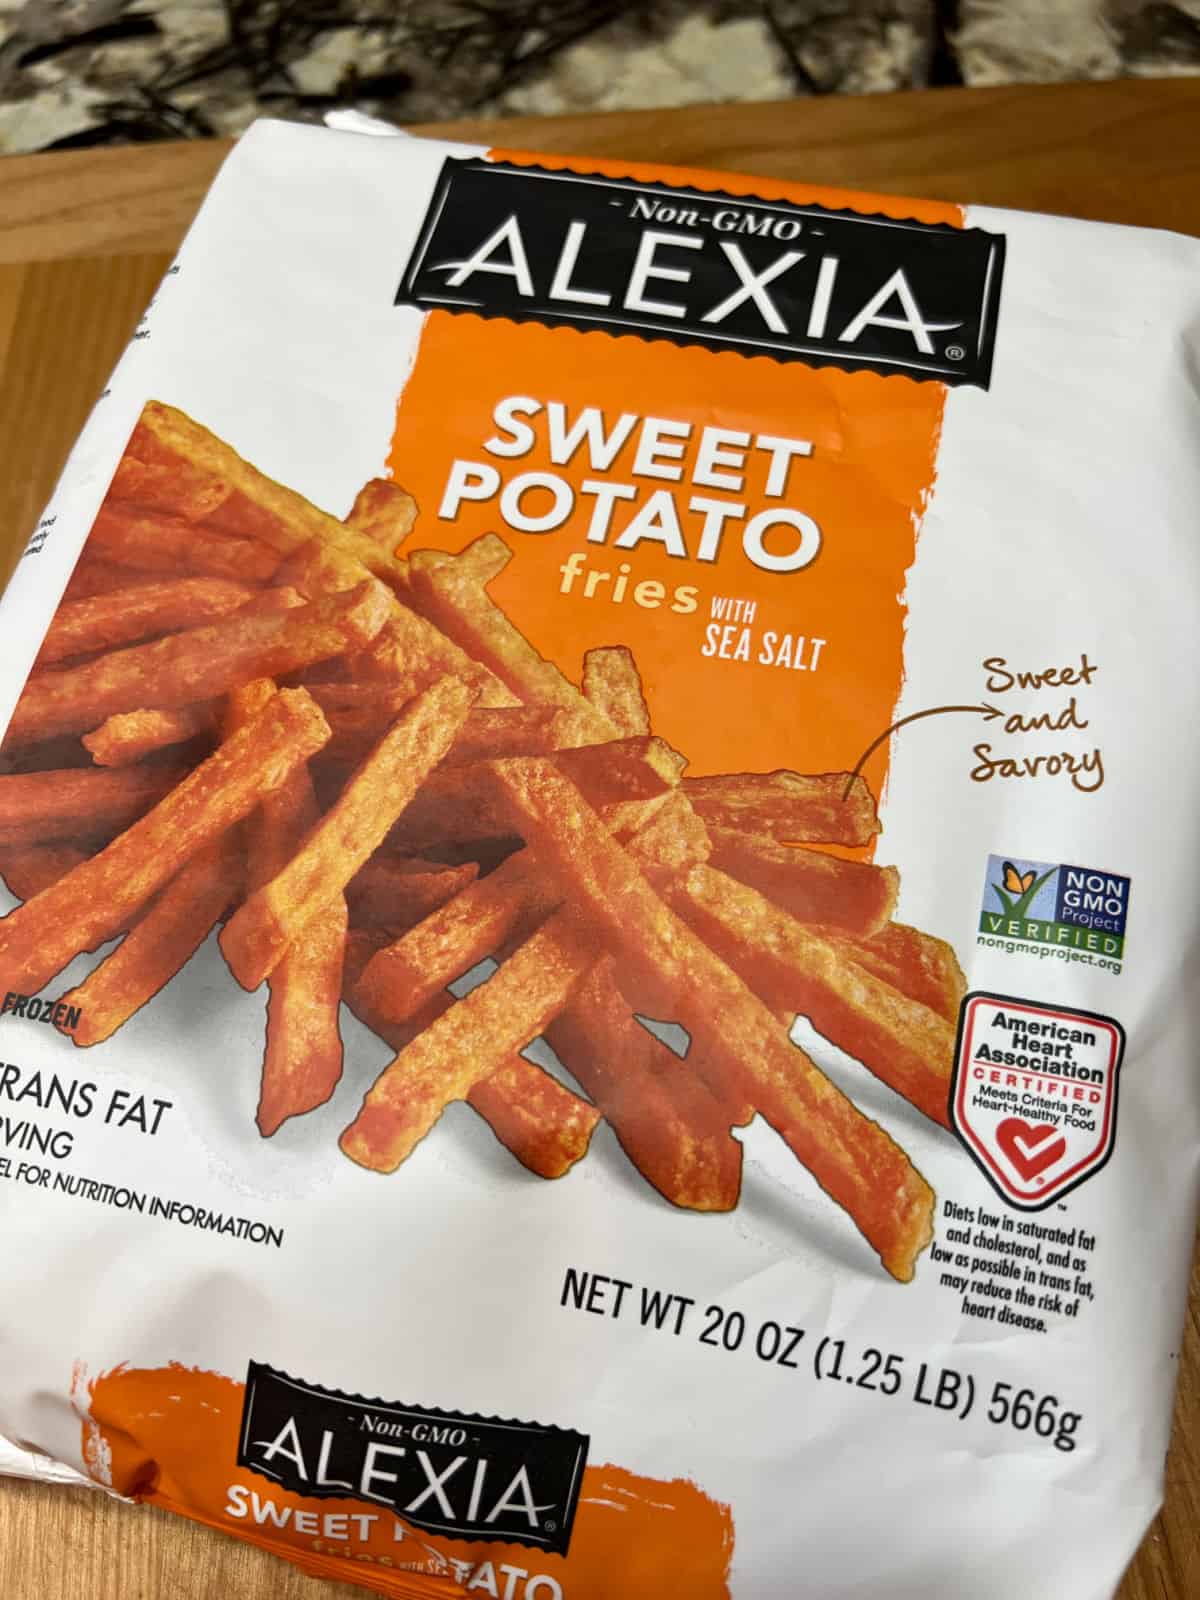 Picture of a bag of Alexia sweet potato fries.